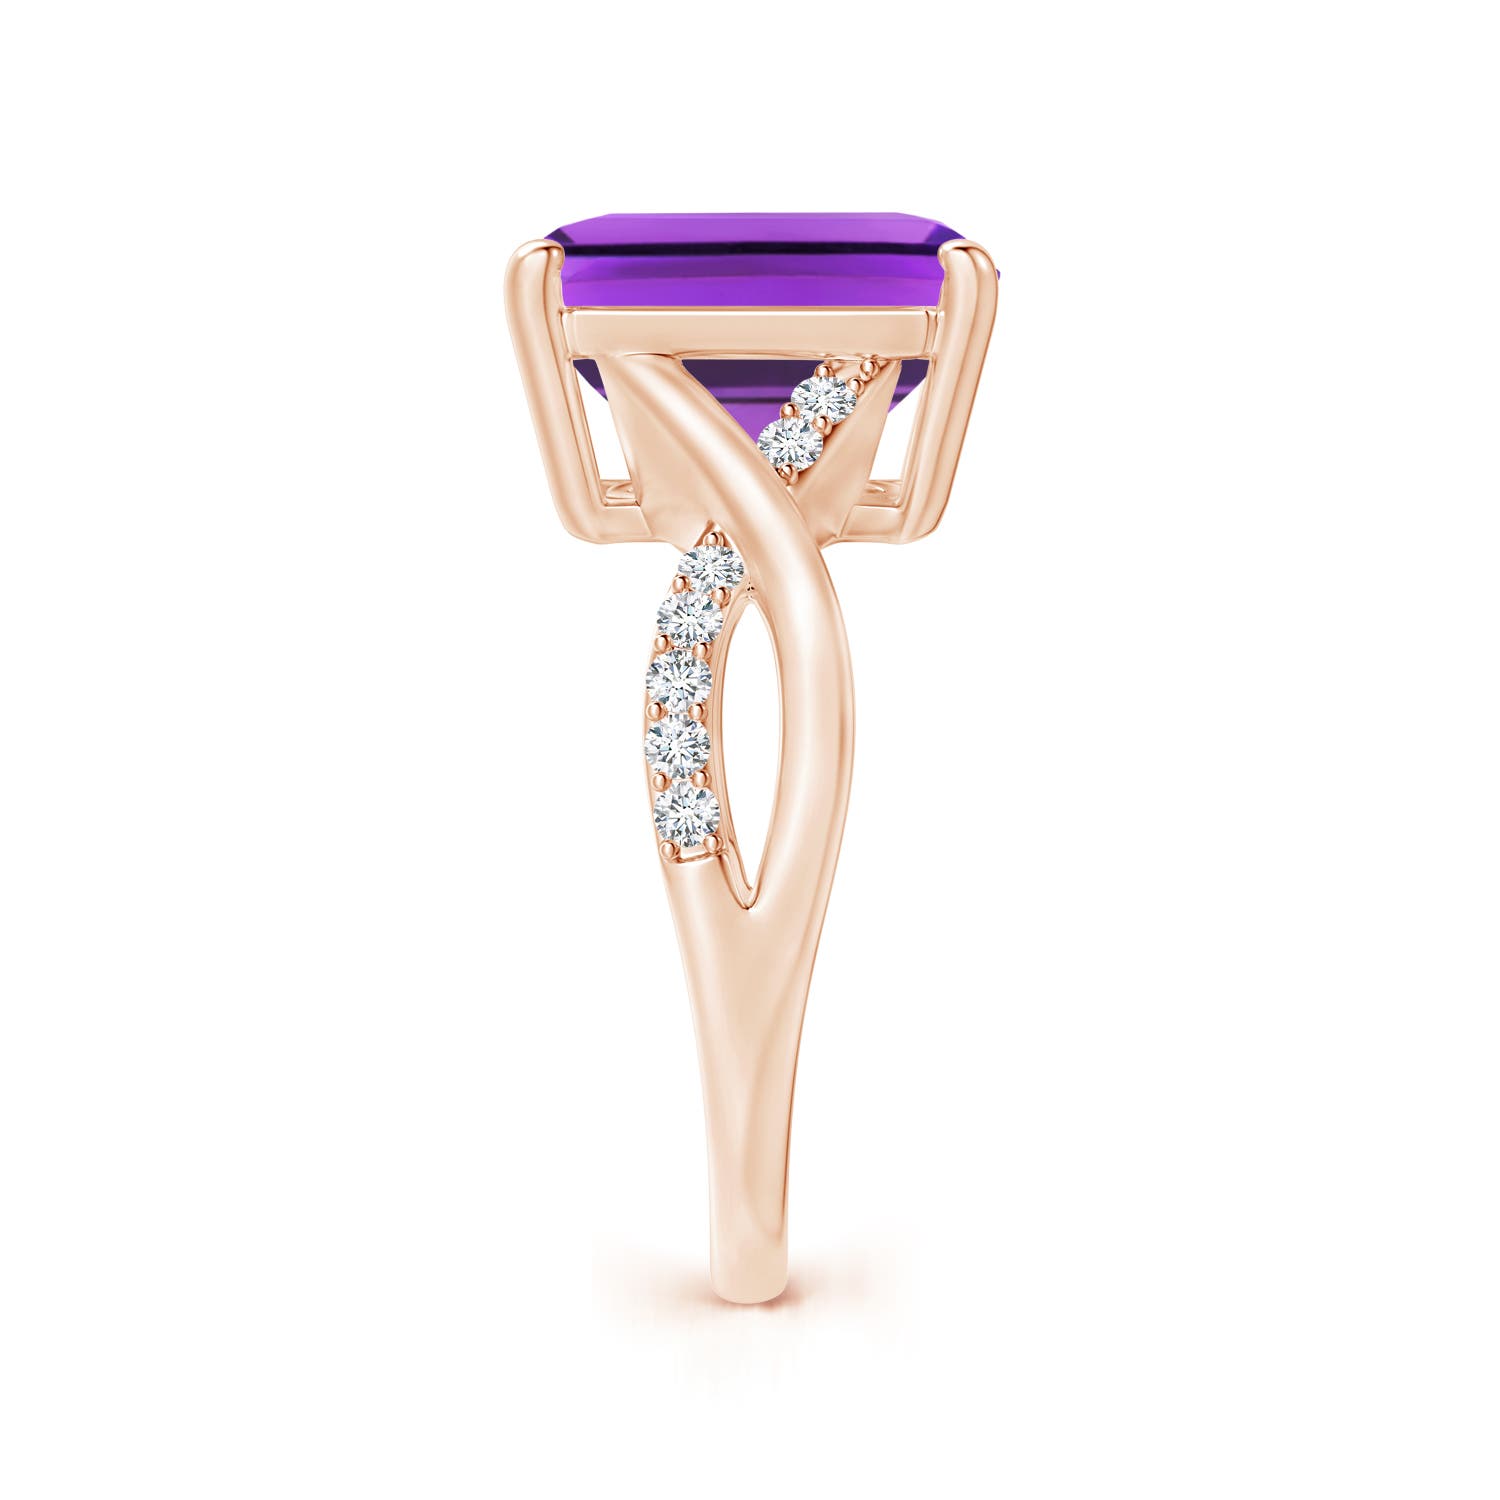 AAA - Amethyst / 5.47 CT / 14 KT Rose Gold